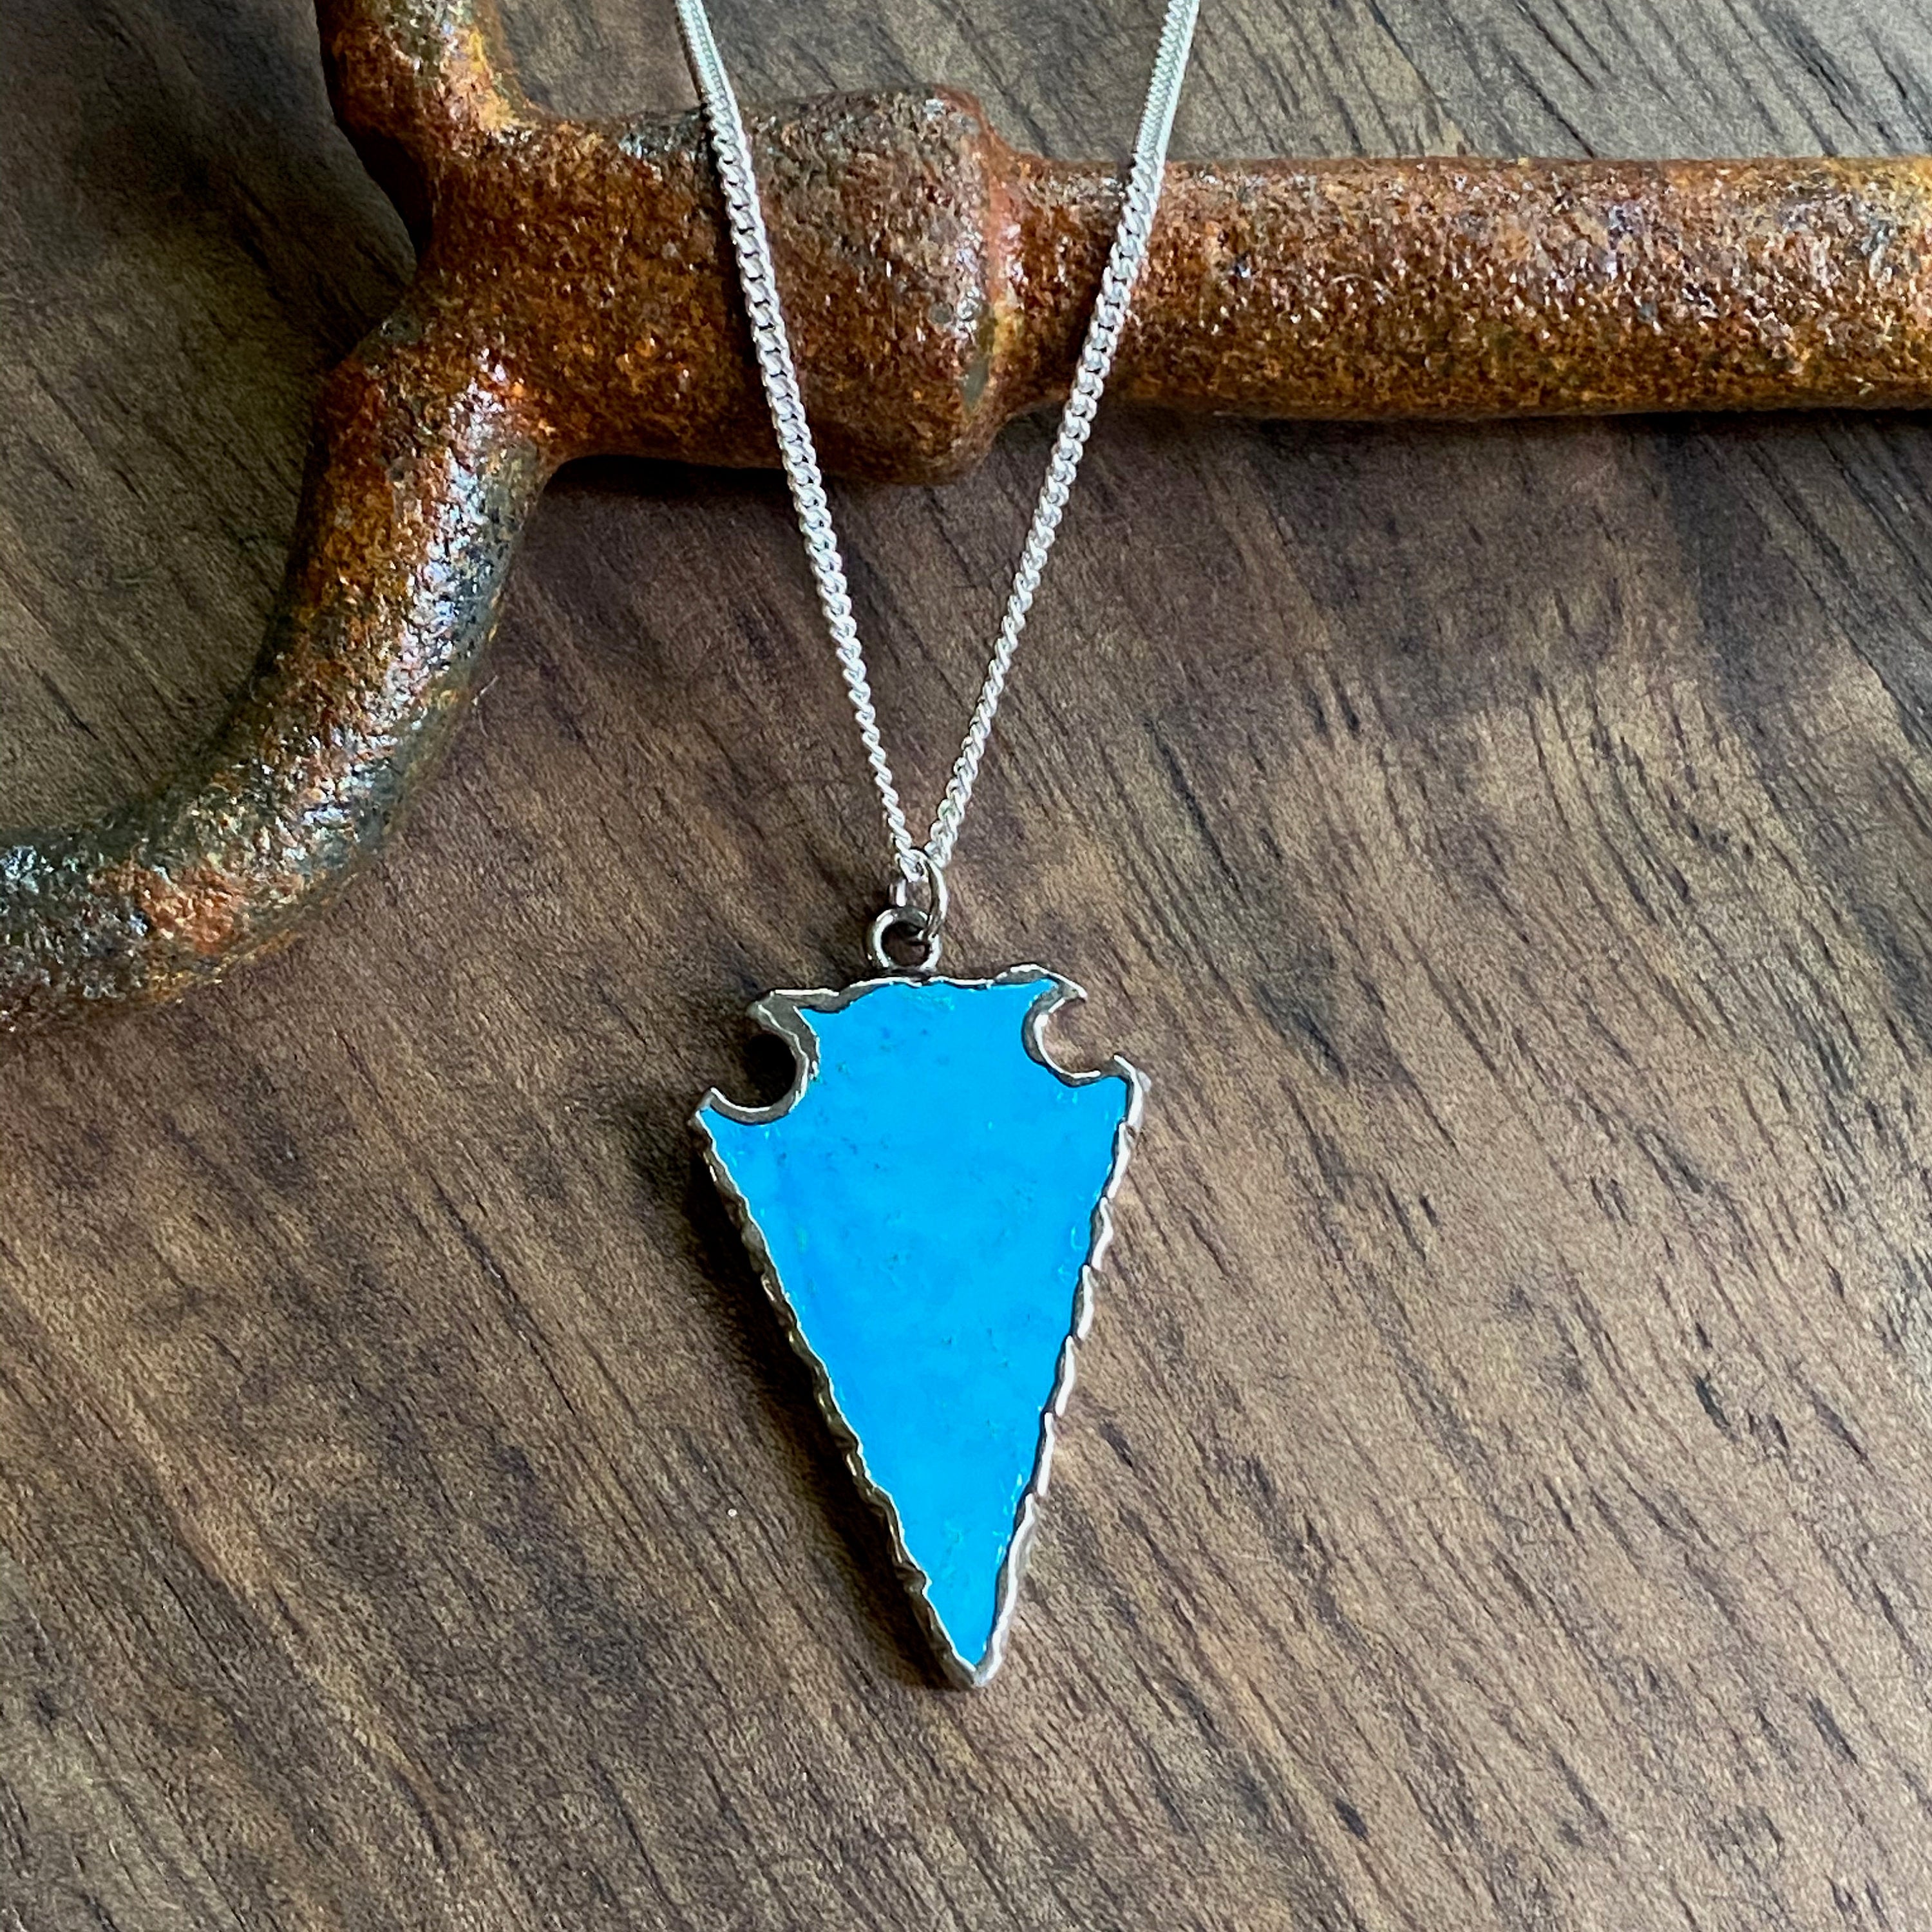 Silver Arrowhead Necklace 925 Sterling Silver Native American Style Arrowhead  Pendant, Southwestern Jewelry Navajo Tribal Necklace for Her - Etsy